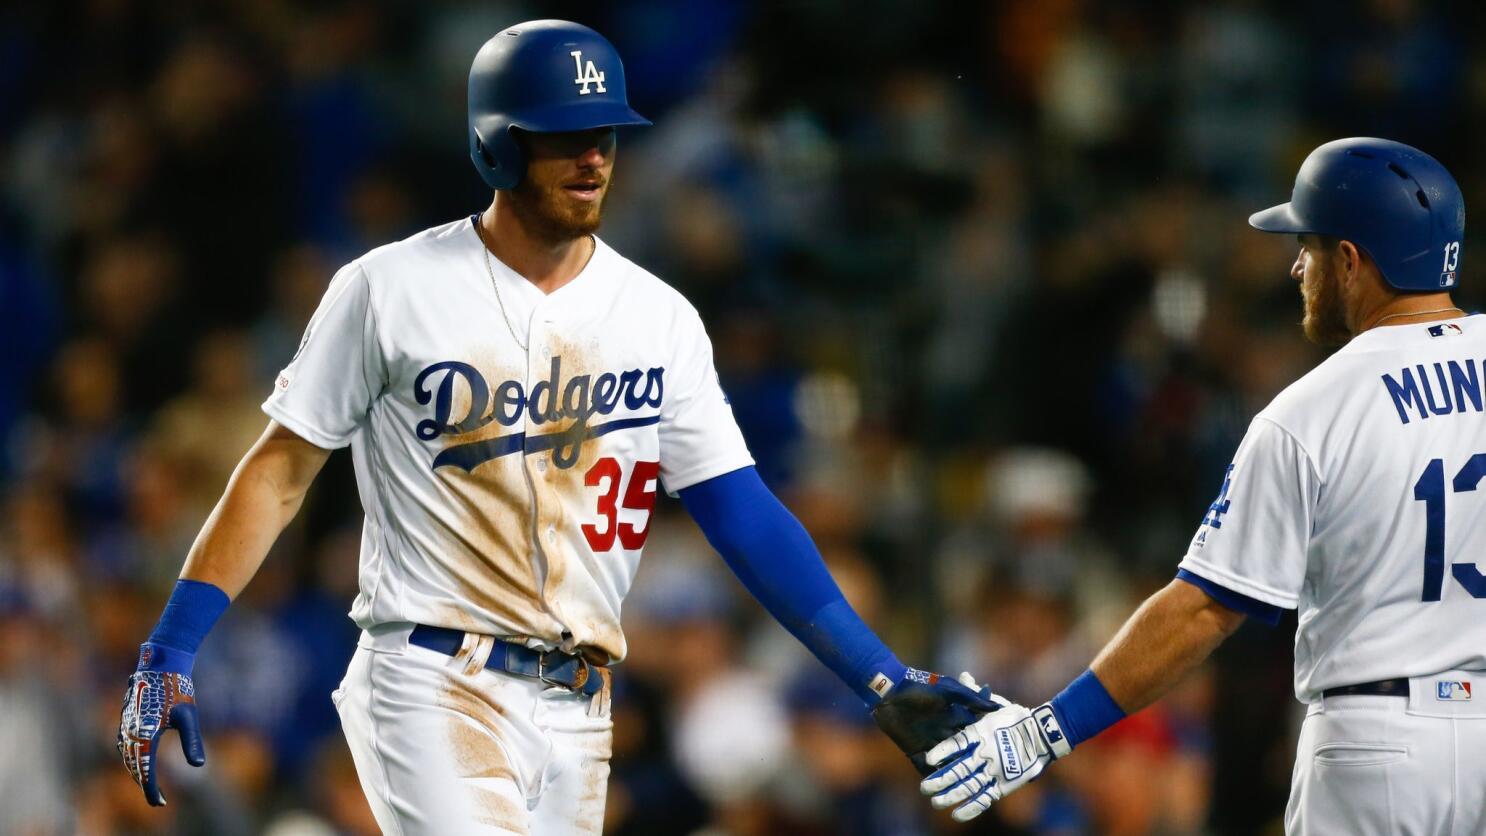 Dodgers in agreement on new deal with Chris Taylor, per report